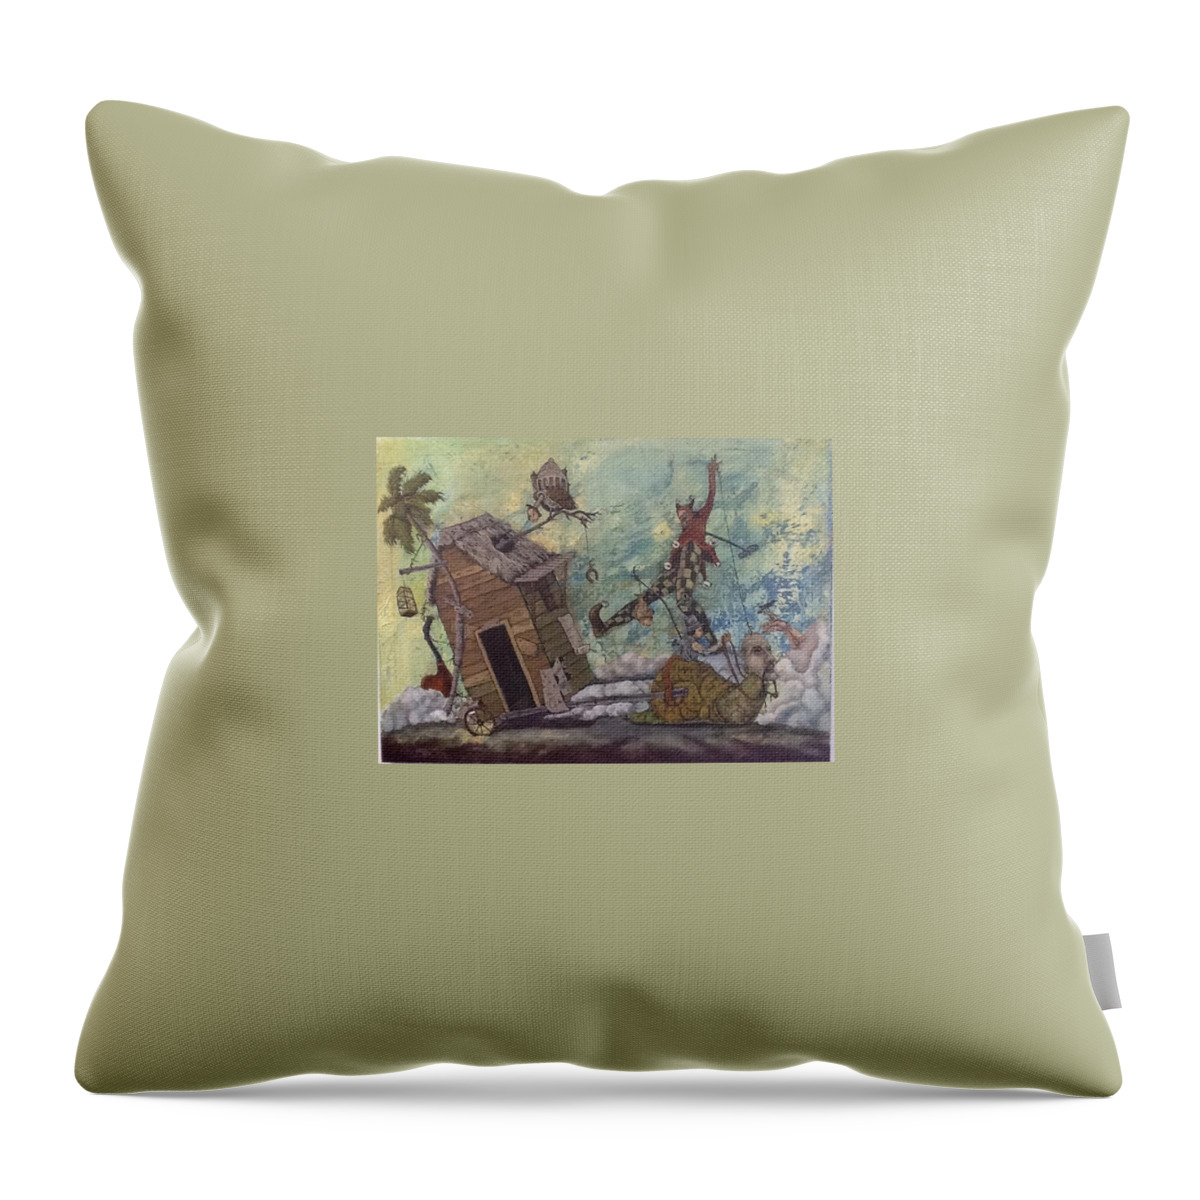 House Throw Pillow featuring the painting Only God Knows by Carlos Rodriguez